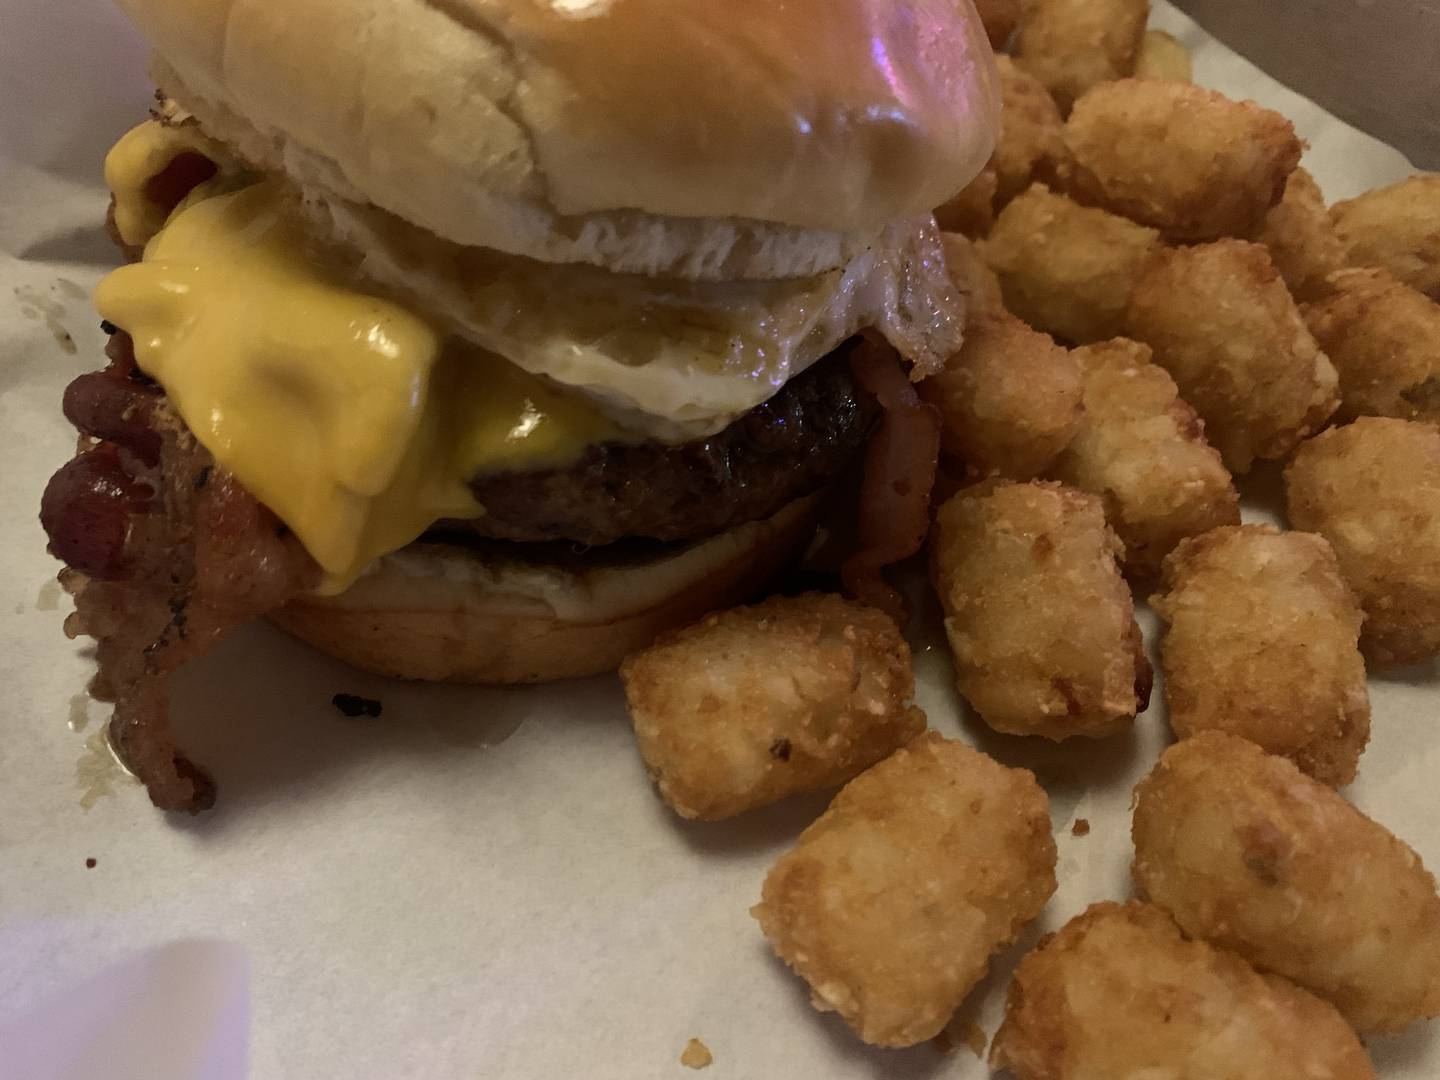 The Breakfast All-Day Steak Burger with tater tots on the side at Cattleman's Burger and Brew in Algonquin.